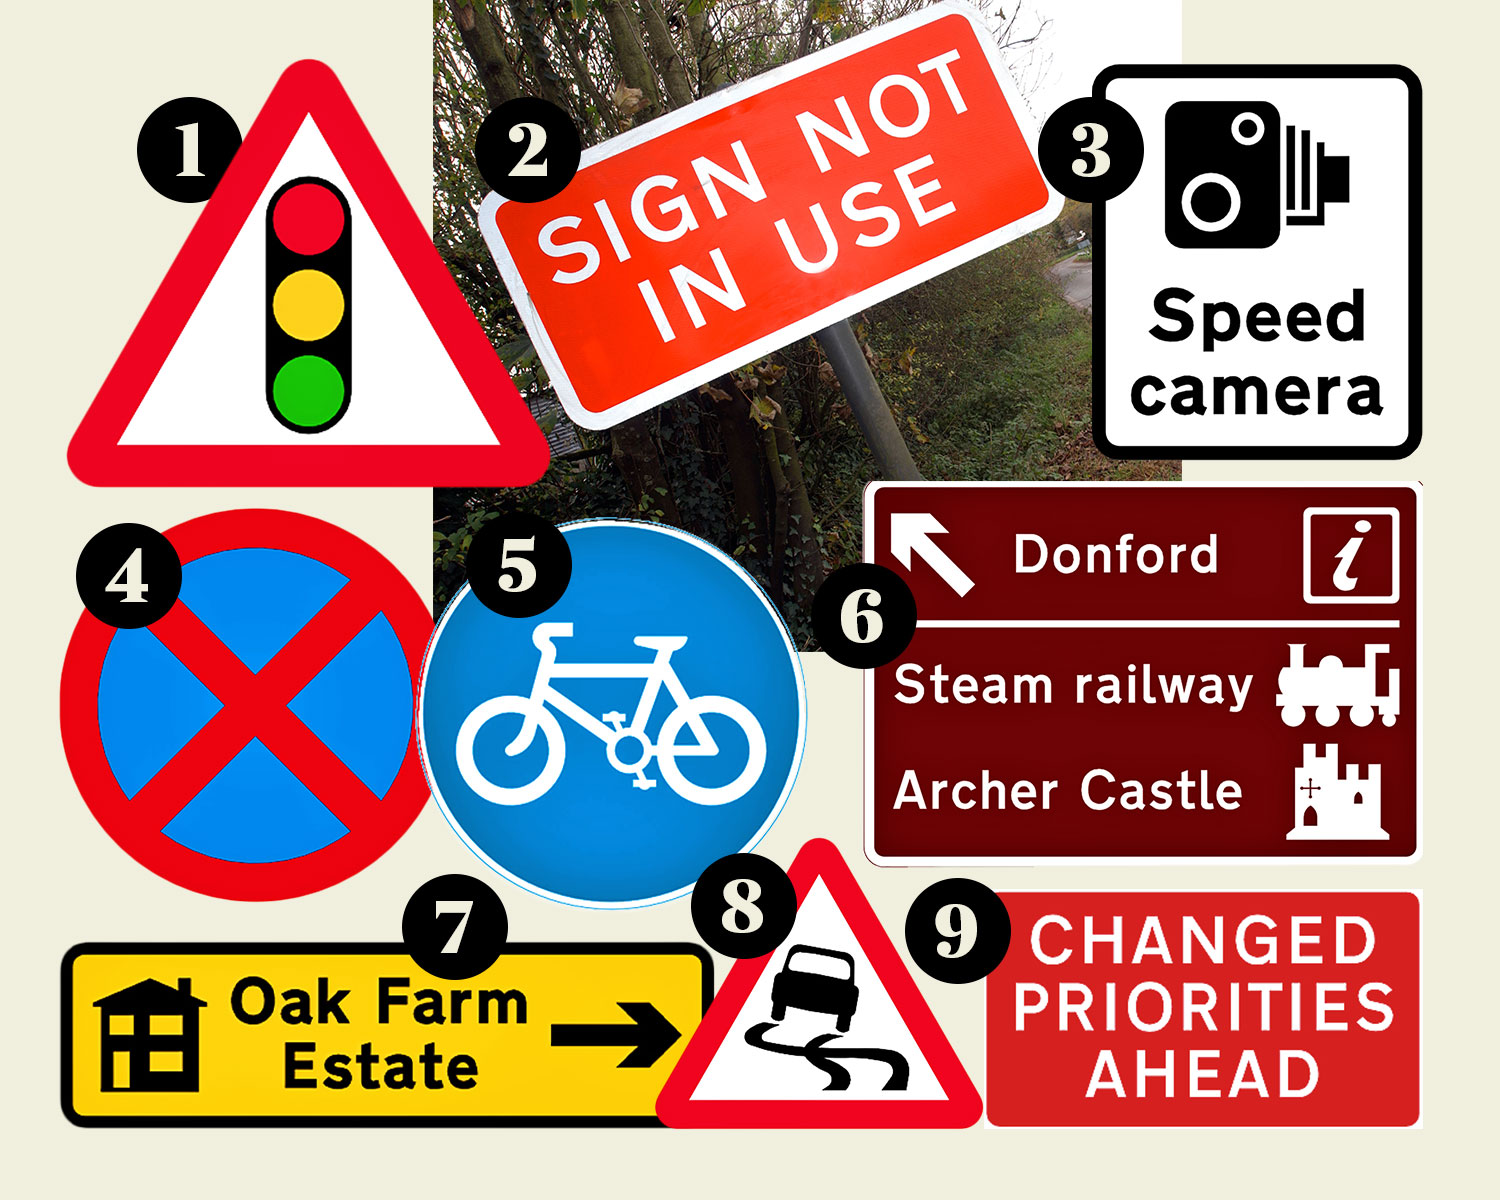 The signs that clutter UK roads